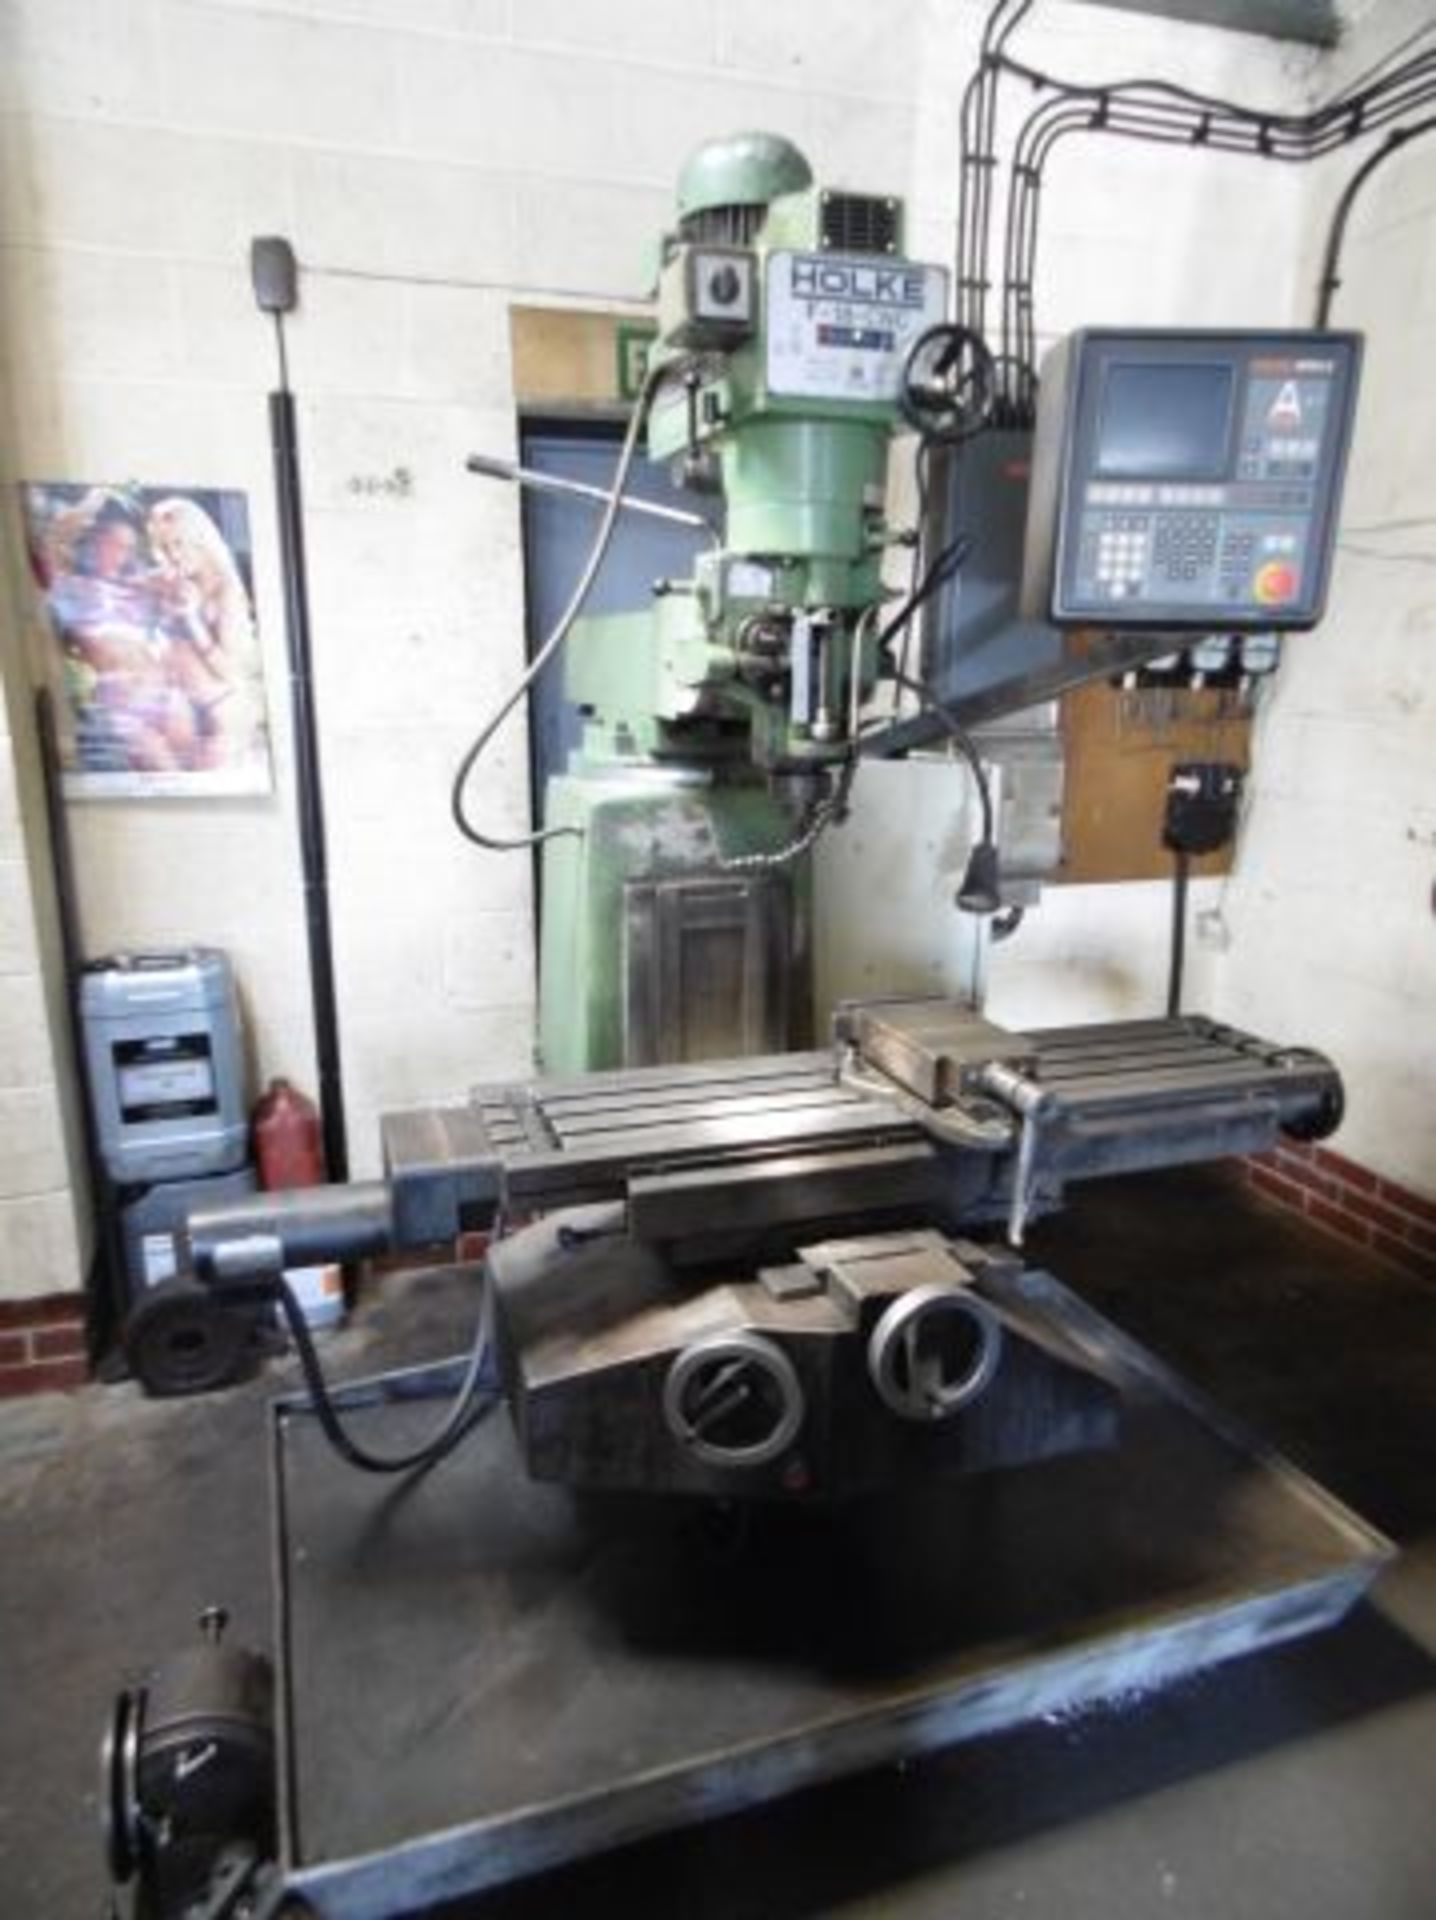 * Otto Holke Type F-18-CNC Vertical Milling Machine with Anilam Crusader Series M Multiprocessor